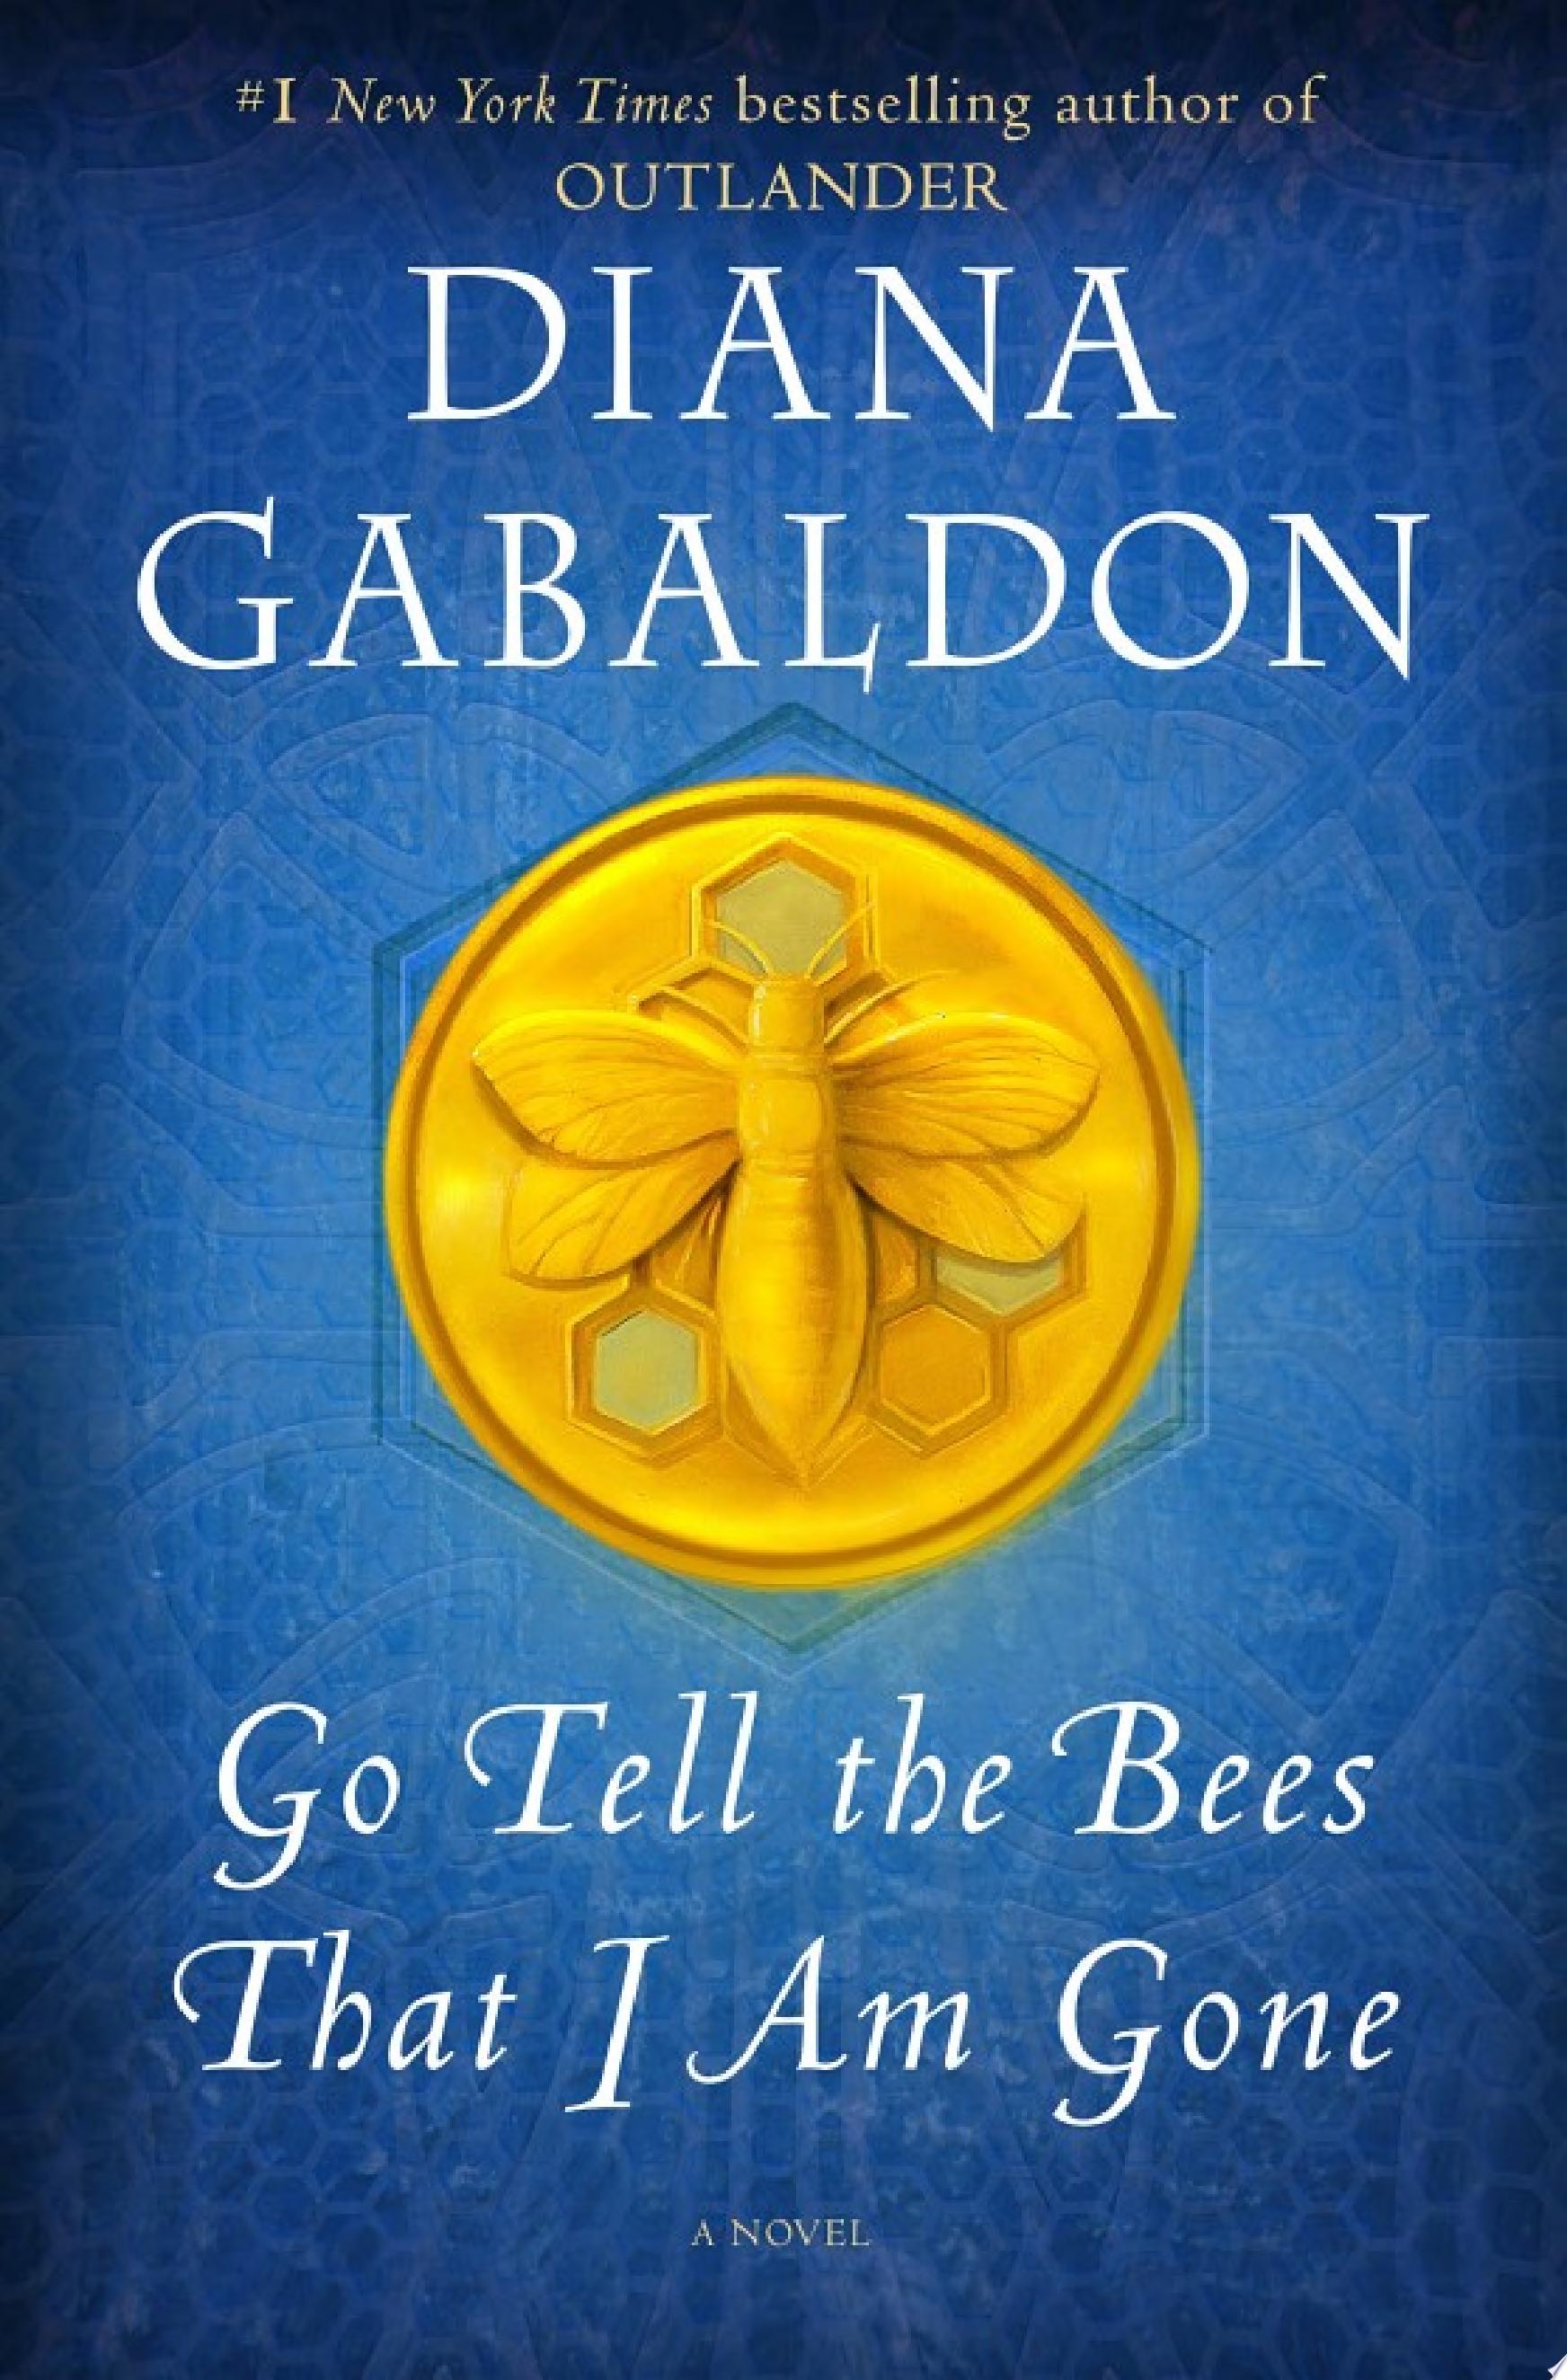 Image for "Go Tell the Bees That I Am Gone"